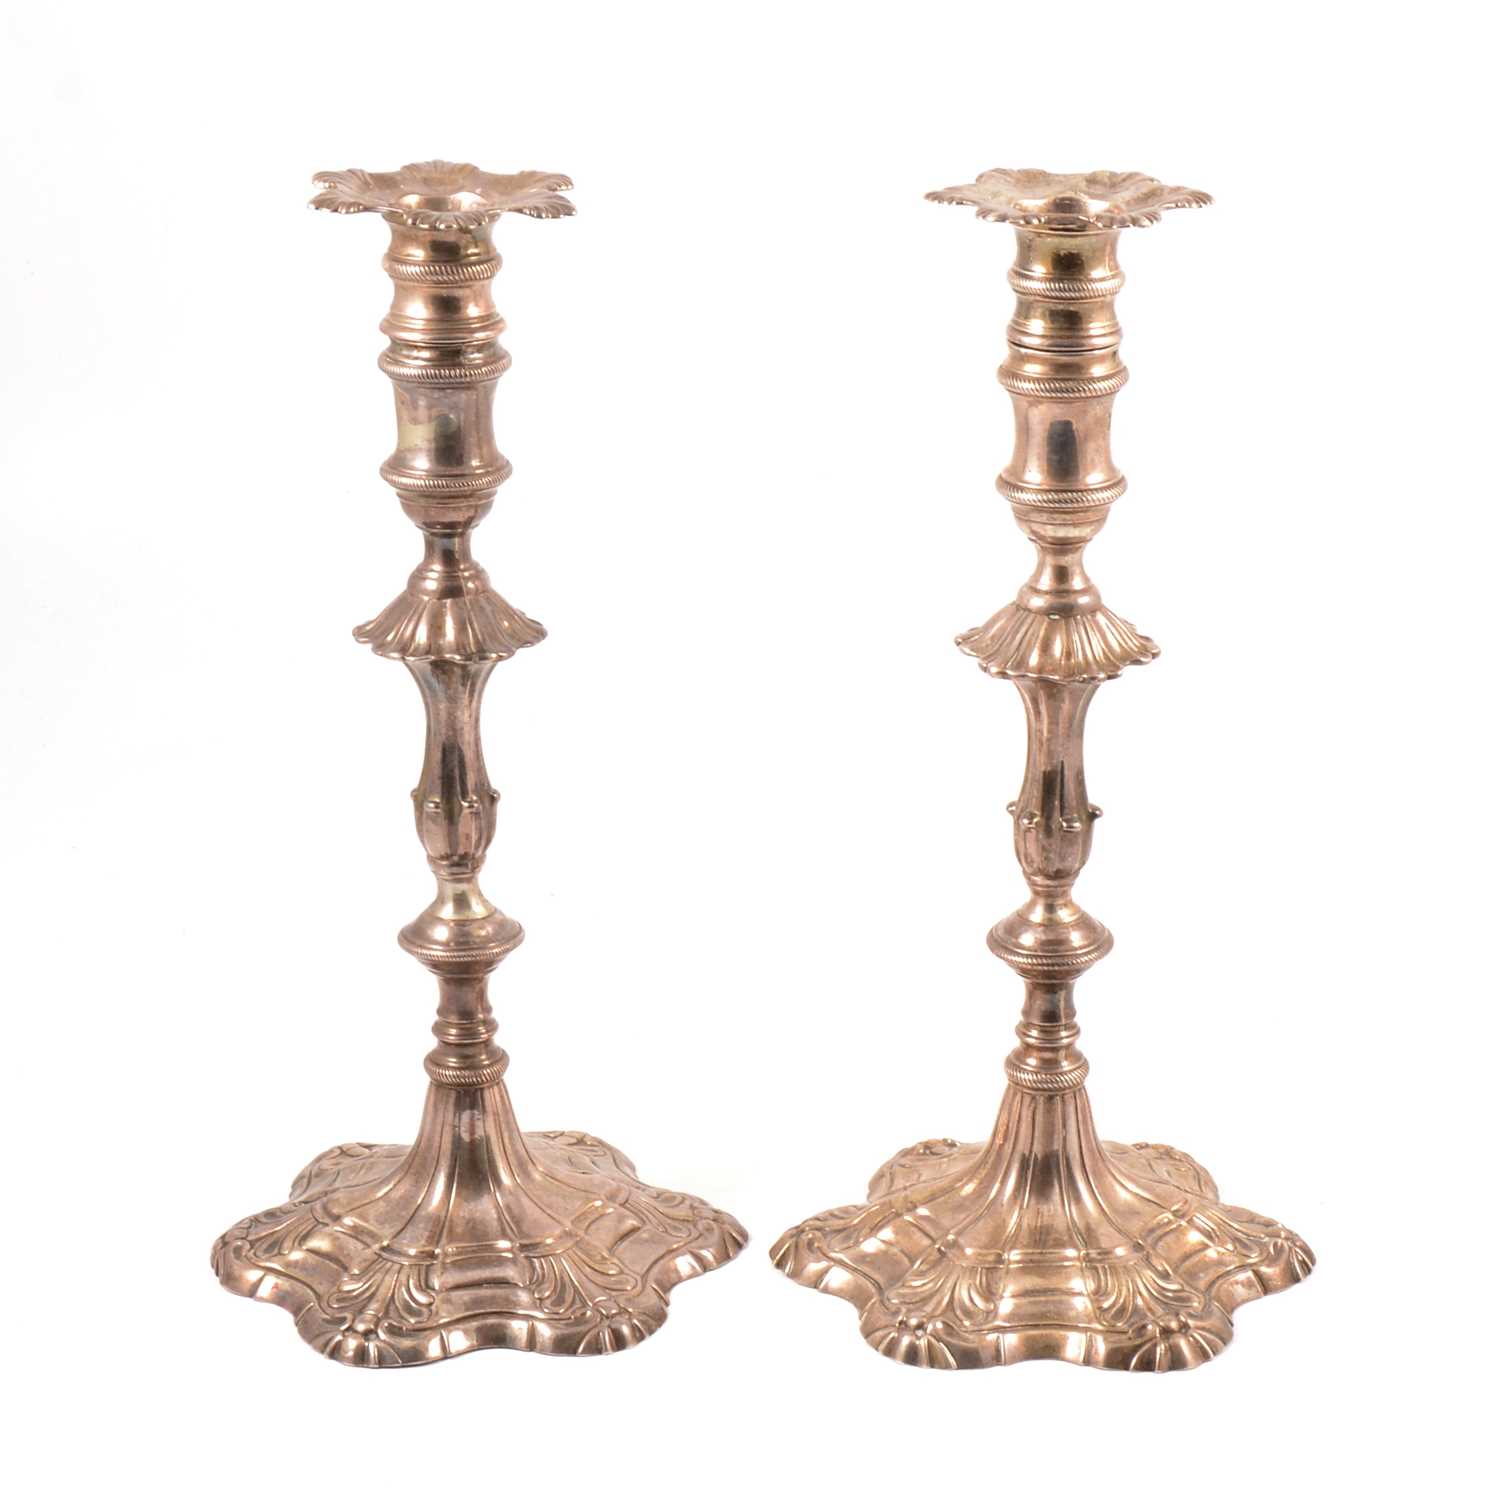 Lot 55 - Matched pair of silver candlesticks, Ebenezer Coker, London 1762 and 1765